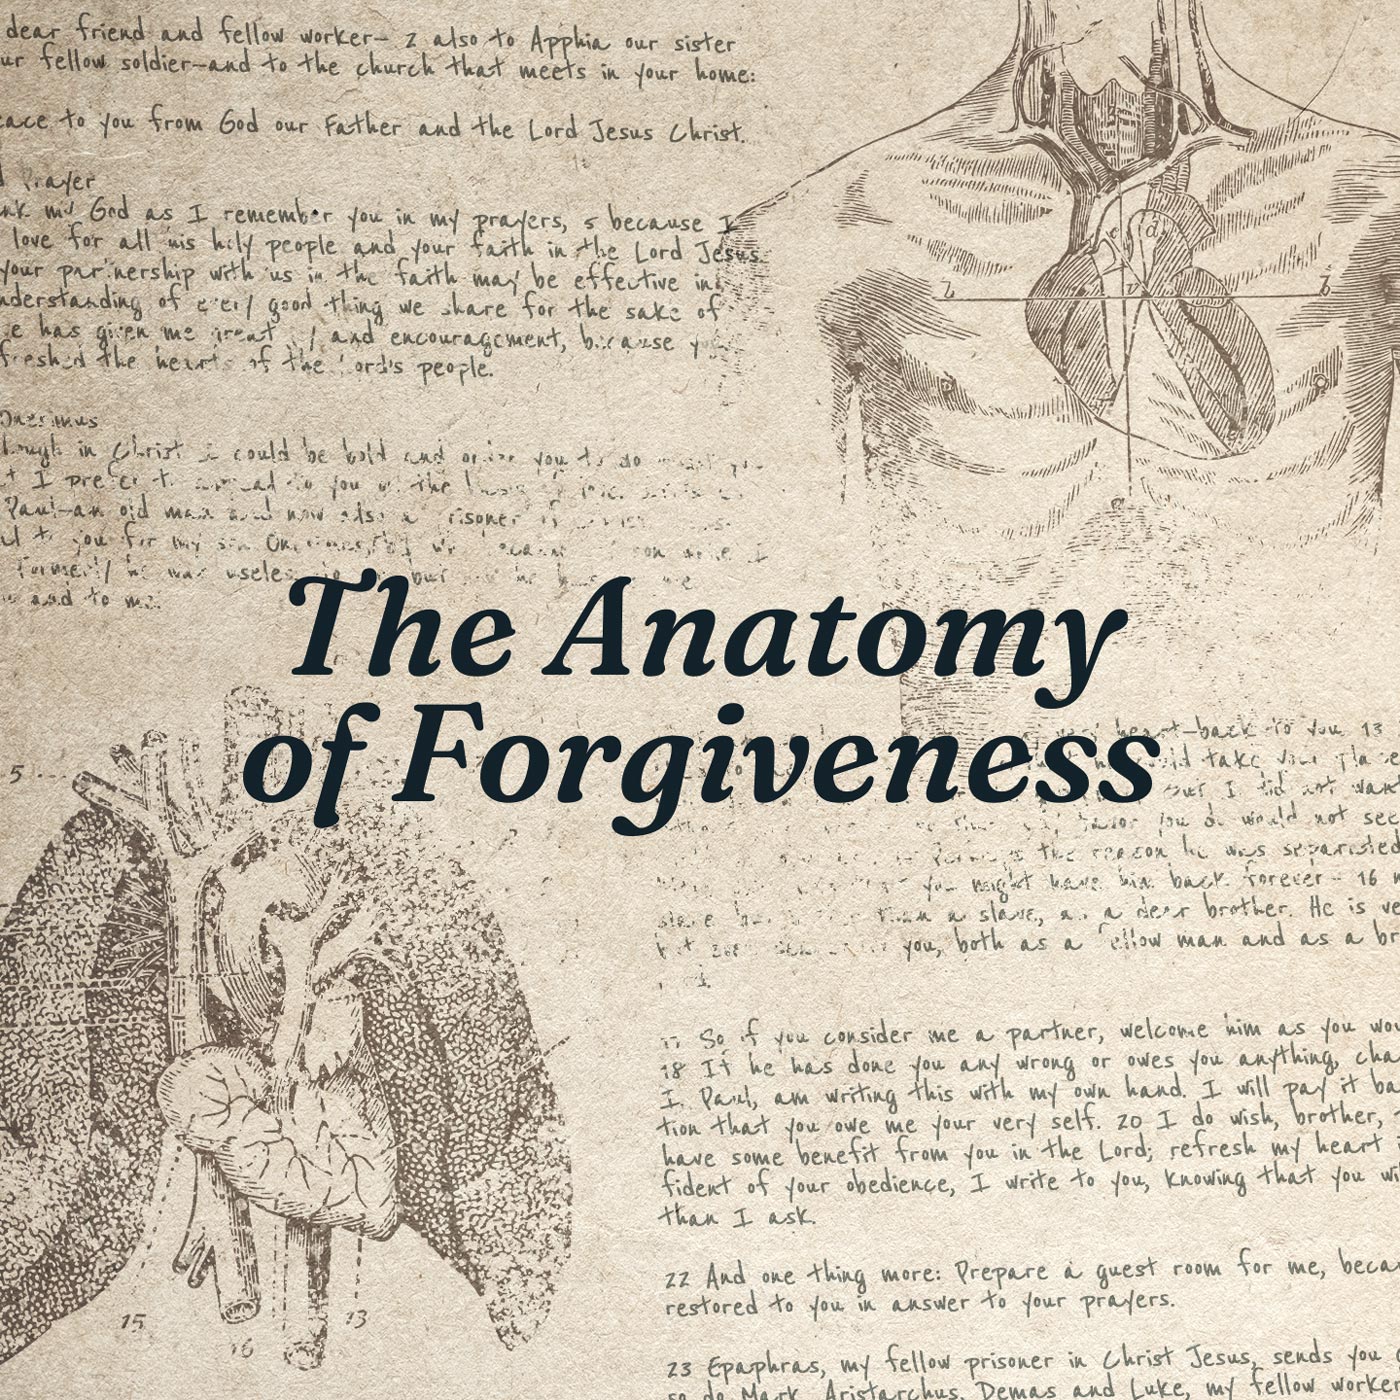 The Anatomy of Forgiveness (Part 2)